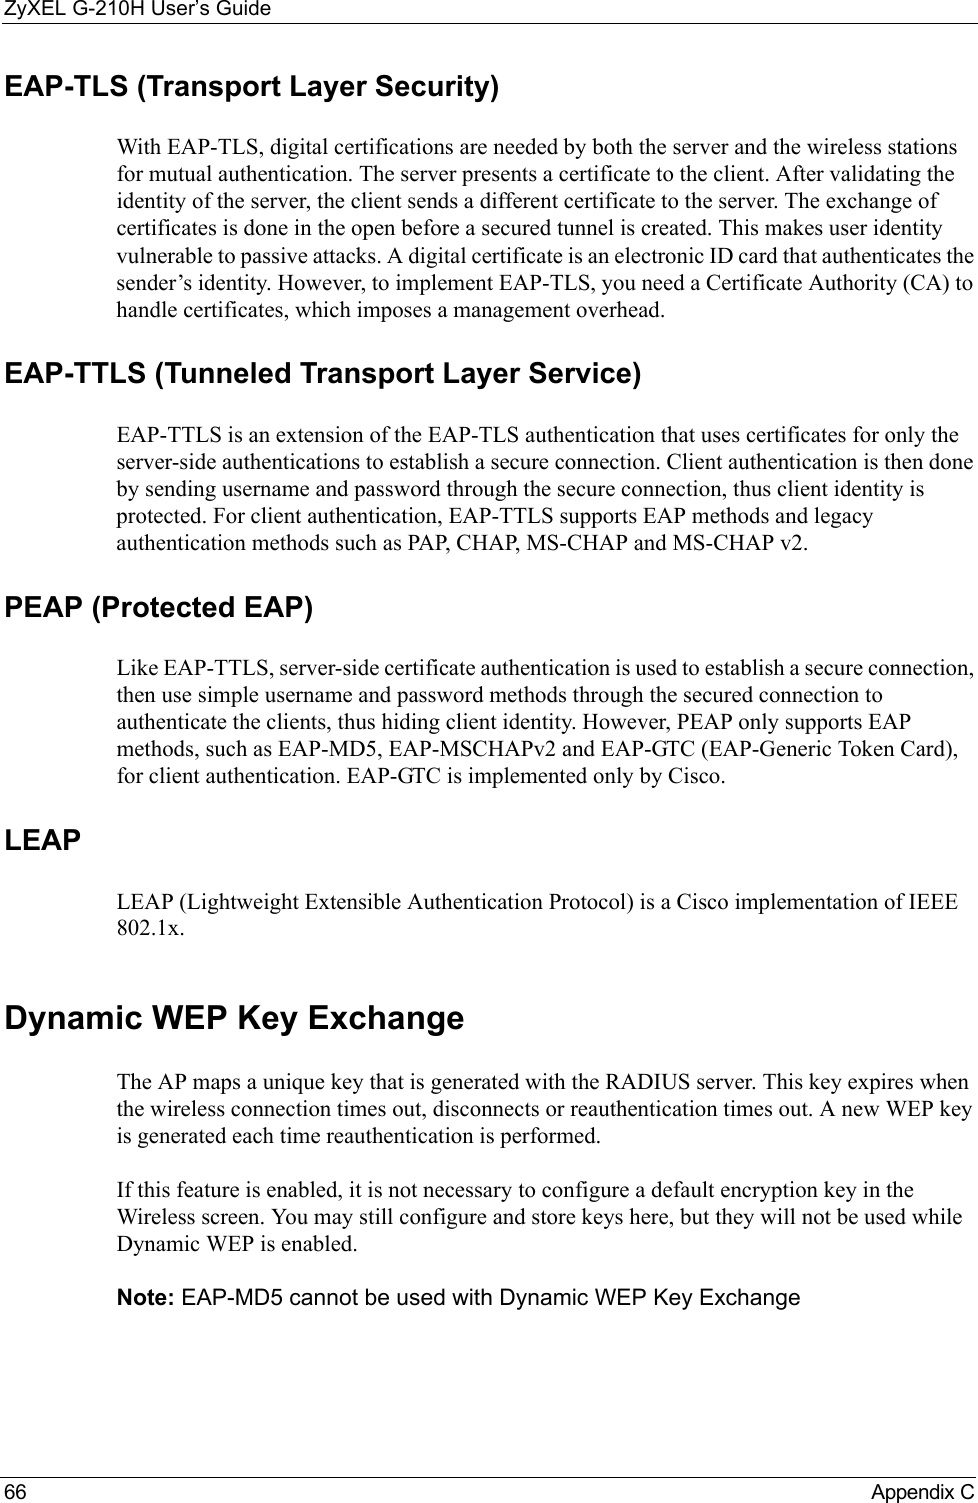 ZyXEL G-210H User’s Guide66 Appendix CEAP-TLS (Transport Layer Security)With EAP-TLS, digital certifications are needed by both the server and the wireless stations for mutual authentication. The server presents a certificate to the client. After validating the identity of the server, the client sends a different certificate to the server. The exchange of certificates is done in the open before a secured tunnel is created. This makes user identity vulnerable to passive attacks. A digital certificate is an electronic ID card that authenticates the sender’s identity. However, to implement EAP-TLS, you need a Certificate Authority (CA) to handle certificates, which imposes a management overhead. EAP-TTLS (Tunneled Transport Layer Service) EAP-TTLS is an extension of the EAP-TLS authentication that uses certificates for only the server-side authentications to establish a secure connection. Client authentication is then done by sending username and password through the secure connection, thus client identity is protected. For client authentication, EAP-TTLS supports EAP methods and legacy authentication methods such as PAP, CHAP, MS-CHAP and MS-CHAP v2. PEAP (Protected EAP)   Like EAP-TTLS, server-side certificate authentication is used to establish a secure connection, then use simple username and password methods through the secured connection to authenticate the clients, thus hiding client identity. However, PEAP only supports EAP methods, such as EAP-MD5, EAP-MSCHAPv2 and EAP-GTC (EAP-Generic Token Card), for client authentication. EAP-GTC is implemented only by Cisco.LEAPLEAP (Lightweight Extensible Authentication Protocol) is a Cisco implementation of IEEE 802.1x. Dynamic WEP Key ExchangeThe AP maps a unique key that is generated with the RADIUS server. This key expires when the wireless connection times out, disconnects or reauthentication times out. A new WEP key is generated each time reauthentication is performed.If this feature is enabled, it is not necessary to configure a default encryption key in the Wireless screen. You may still configure and store keys here, but they will not be used while Dynamic WEP is enabled.Note: EAP-MD5 cannot be used with Dynamic WEP Key Exchange